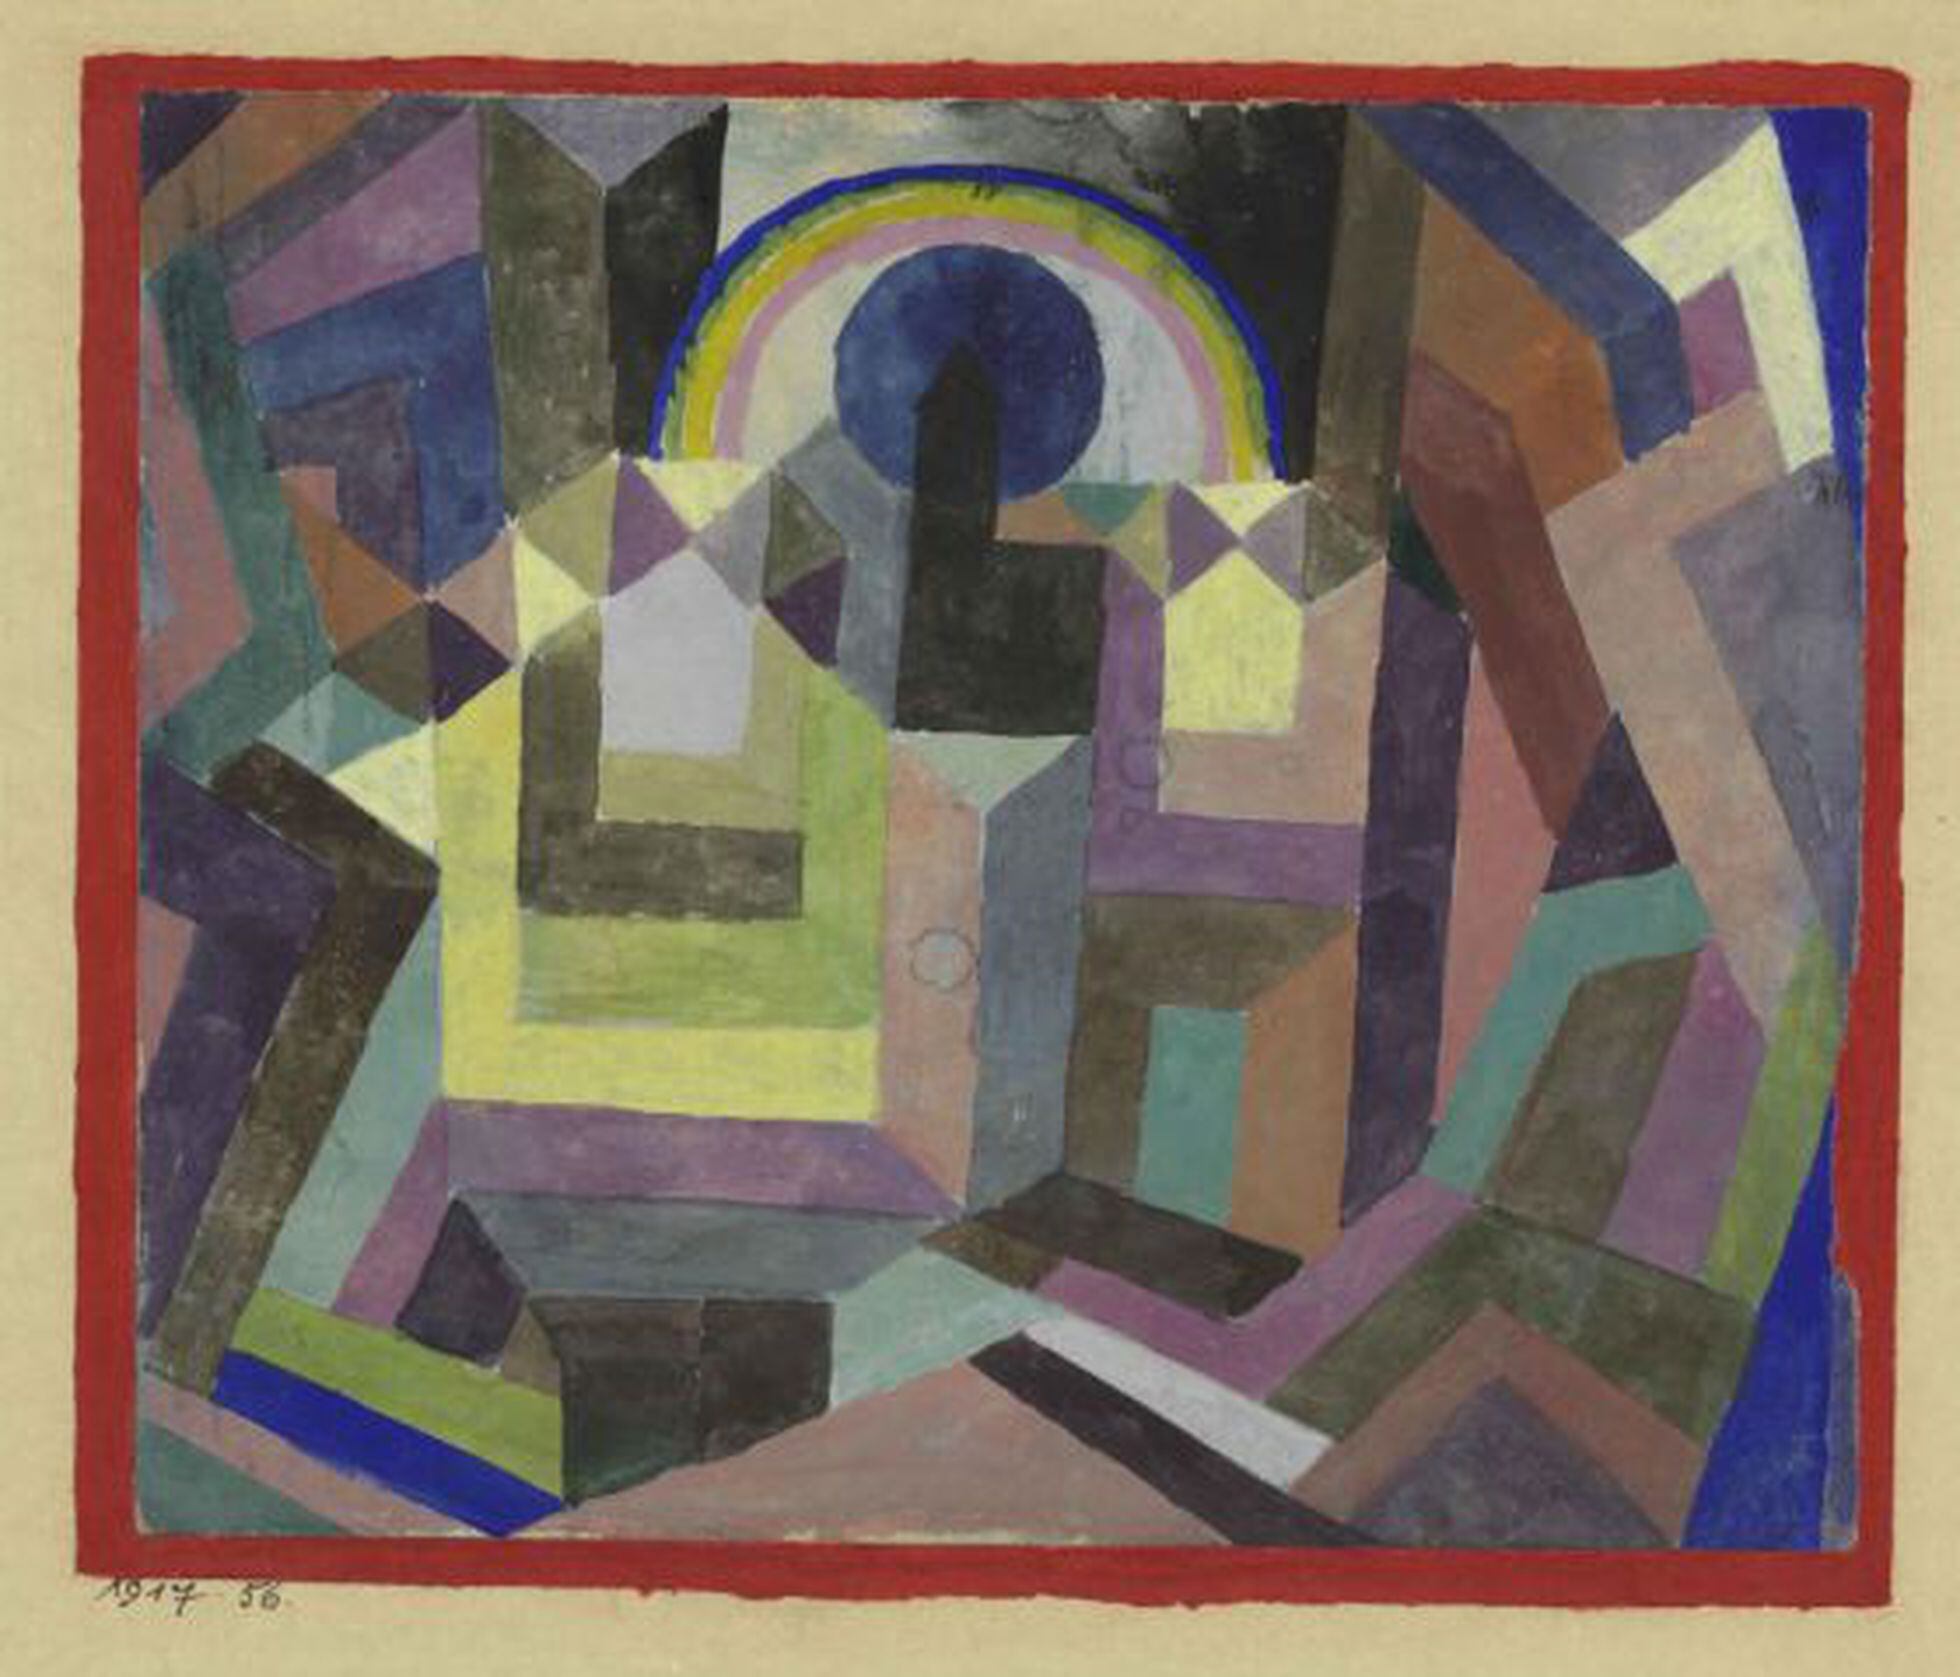 Paul Klee - theory and practice | Spain | EL PAÍS English